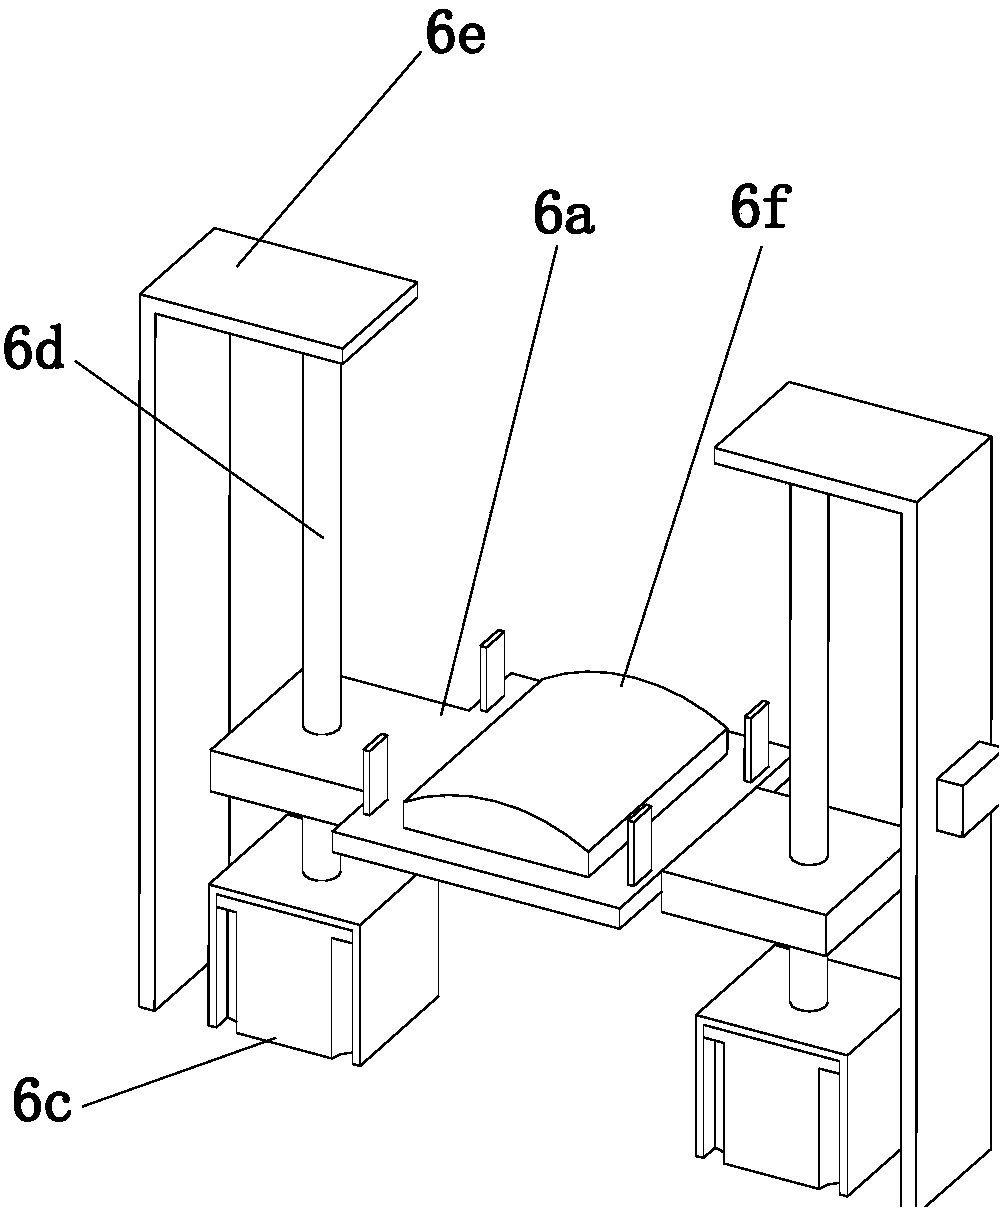 Charging mechanism of automatic magnetic shoe deburring device